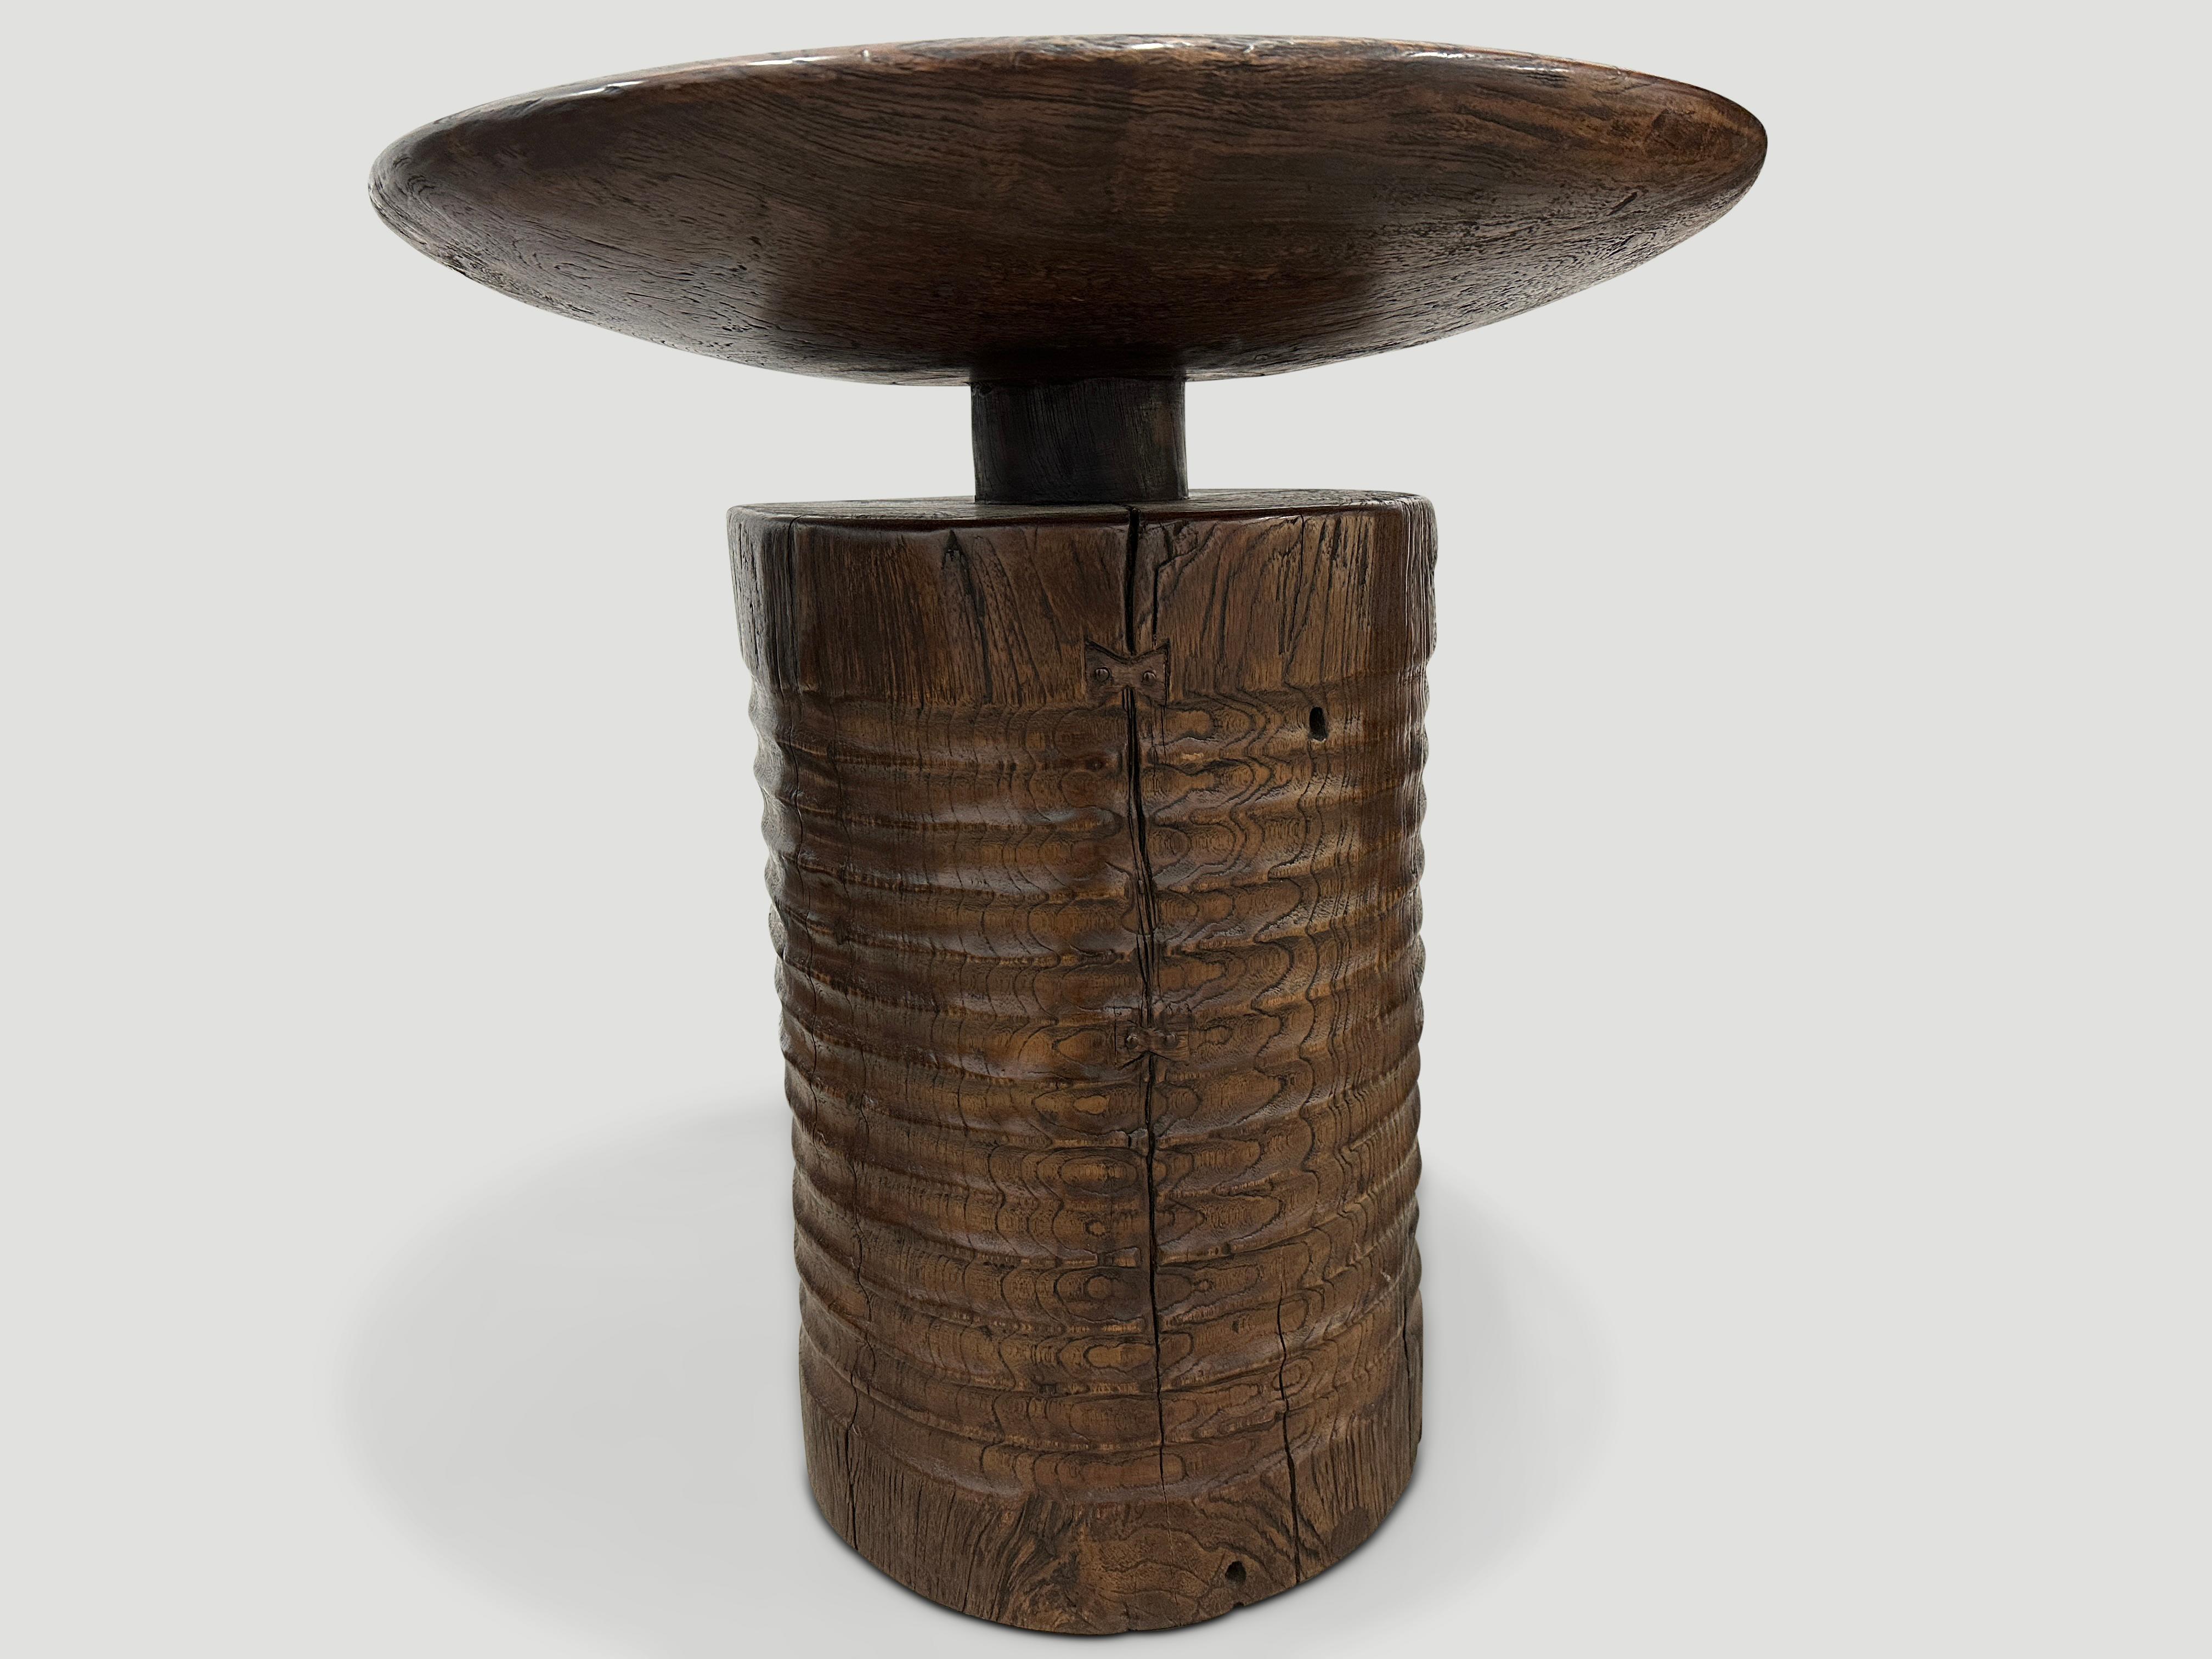 A century old mortar originally used to grind rice is repurposed into this unique side table or entrance table featuring our unique minimalist carving. We added a single teak thick bevelled round top and a translucent chocolate stain revealing the